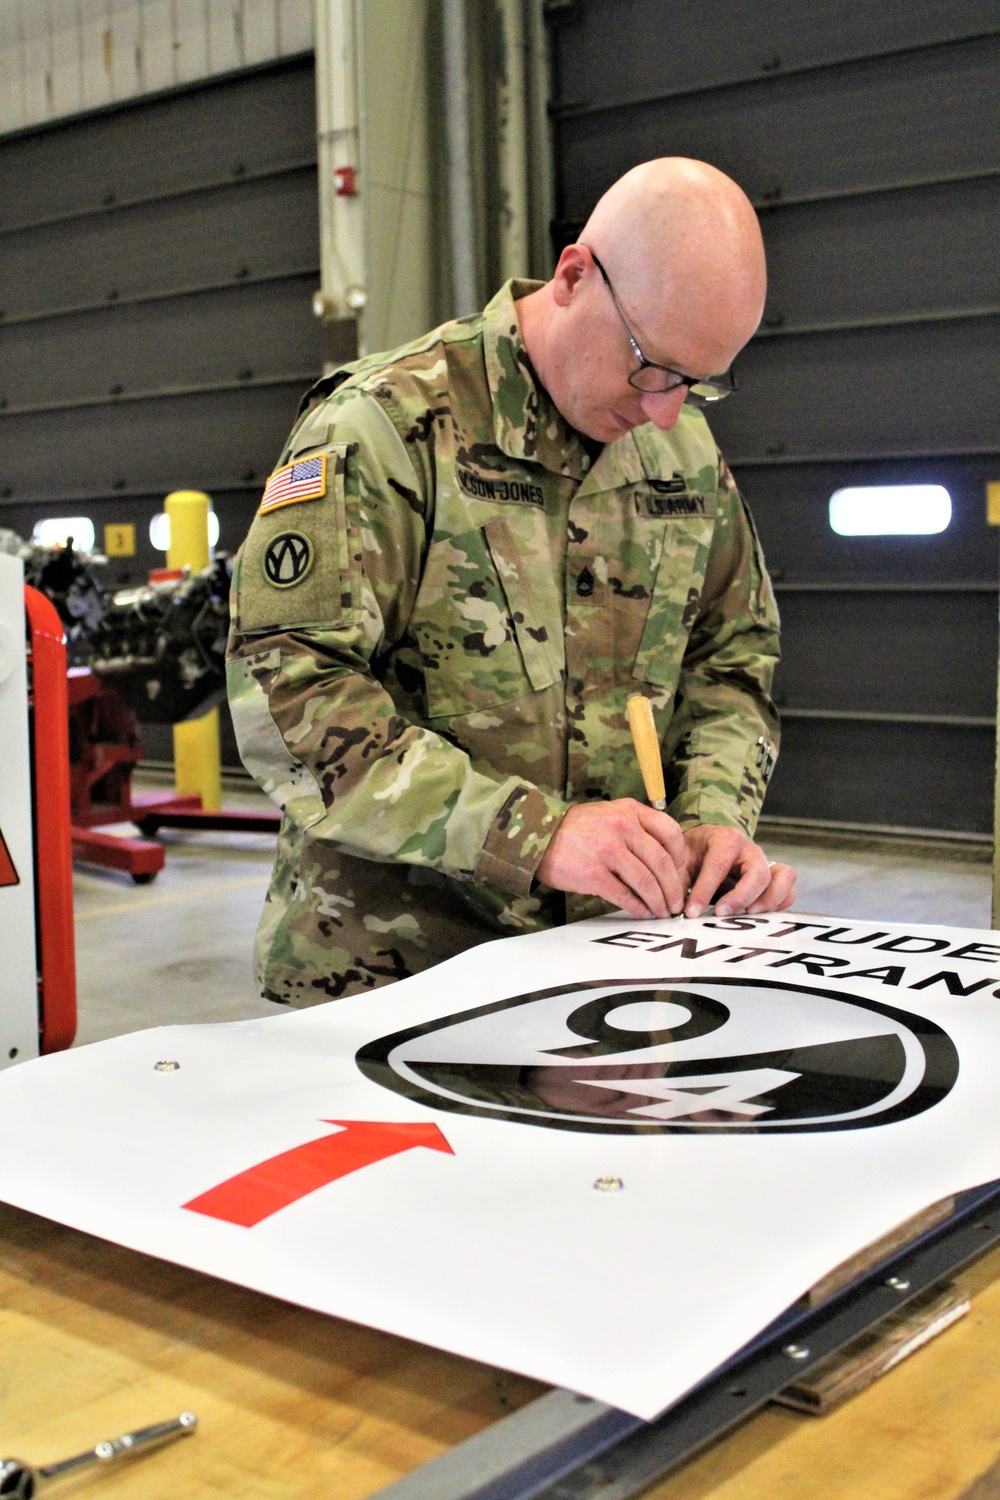 Full training schedule returns to Fort McCoy's RTS-Maintenance